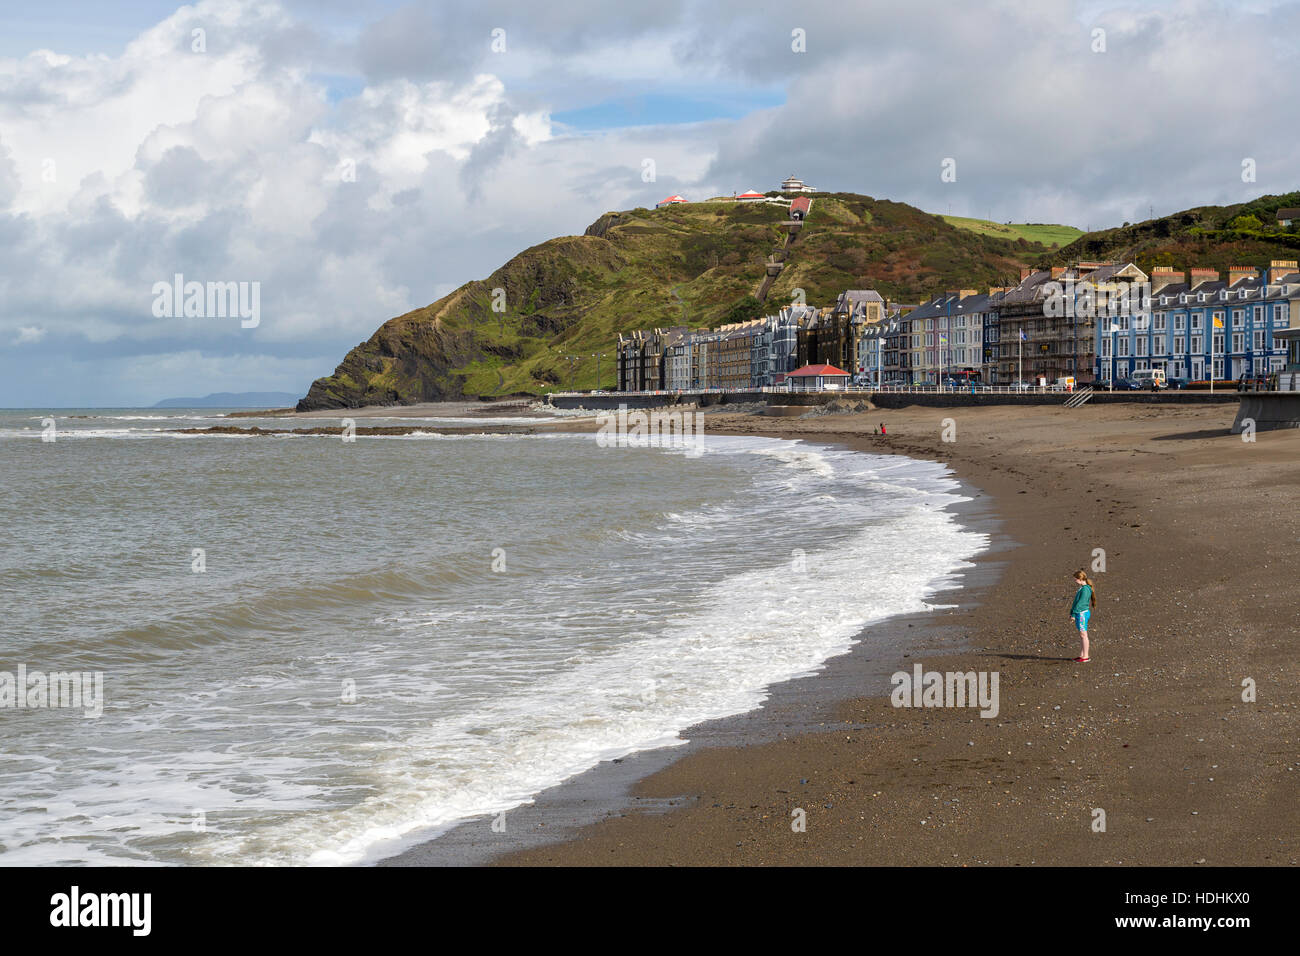 Sea front with girl standing on beach, Aberystwyth, Wales, UK Stock Photo